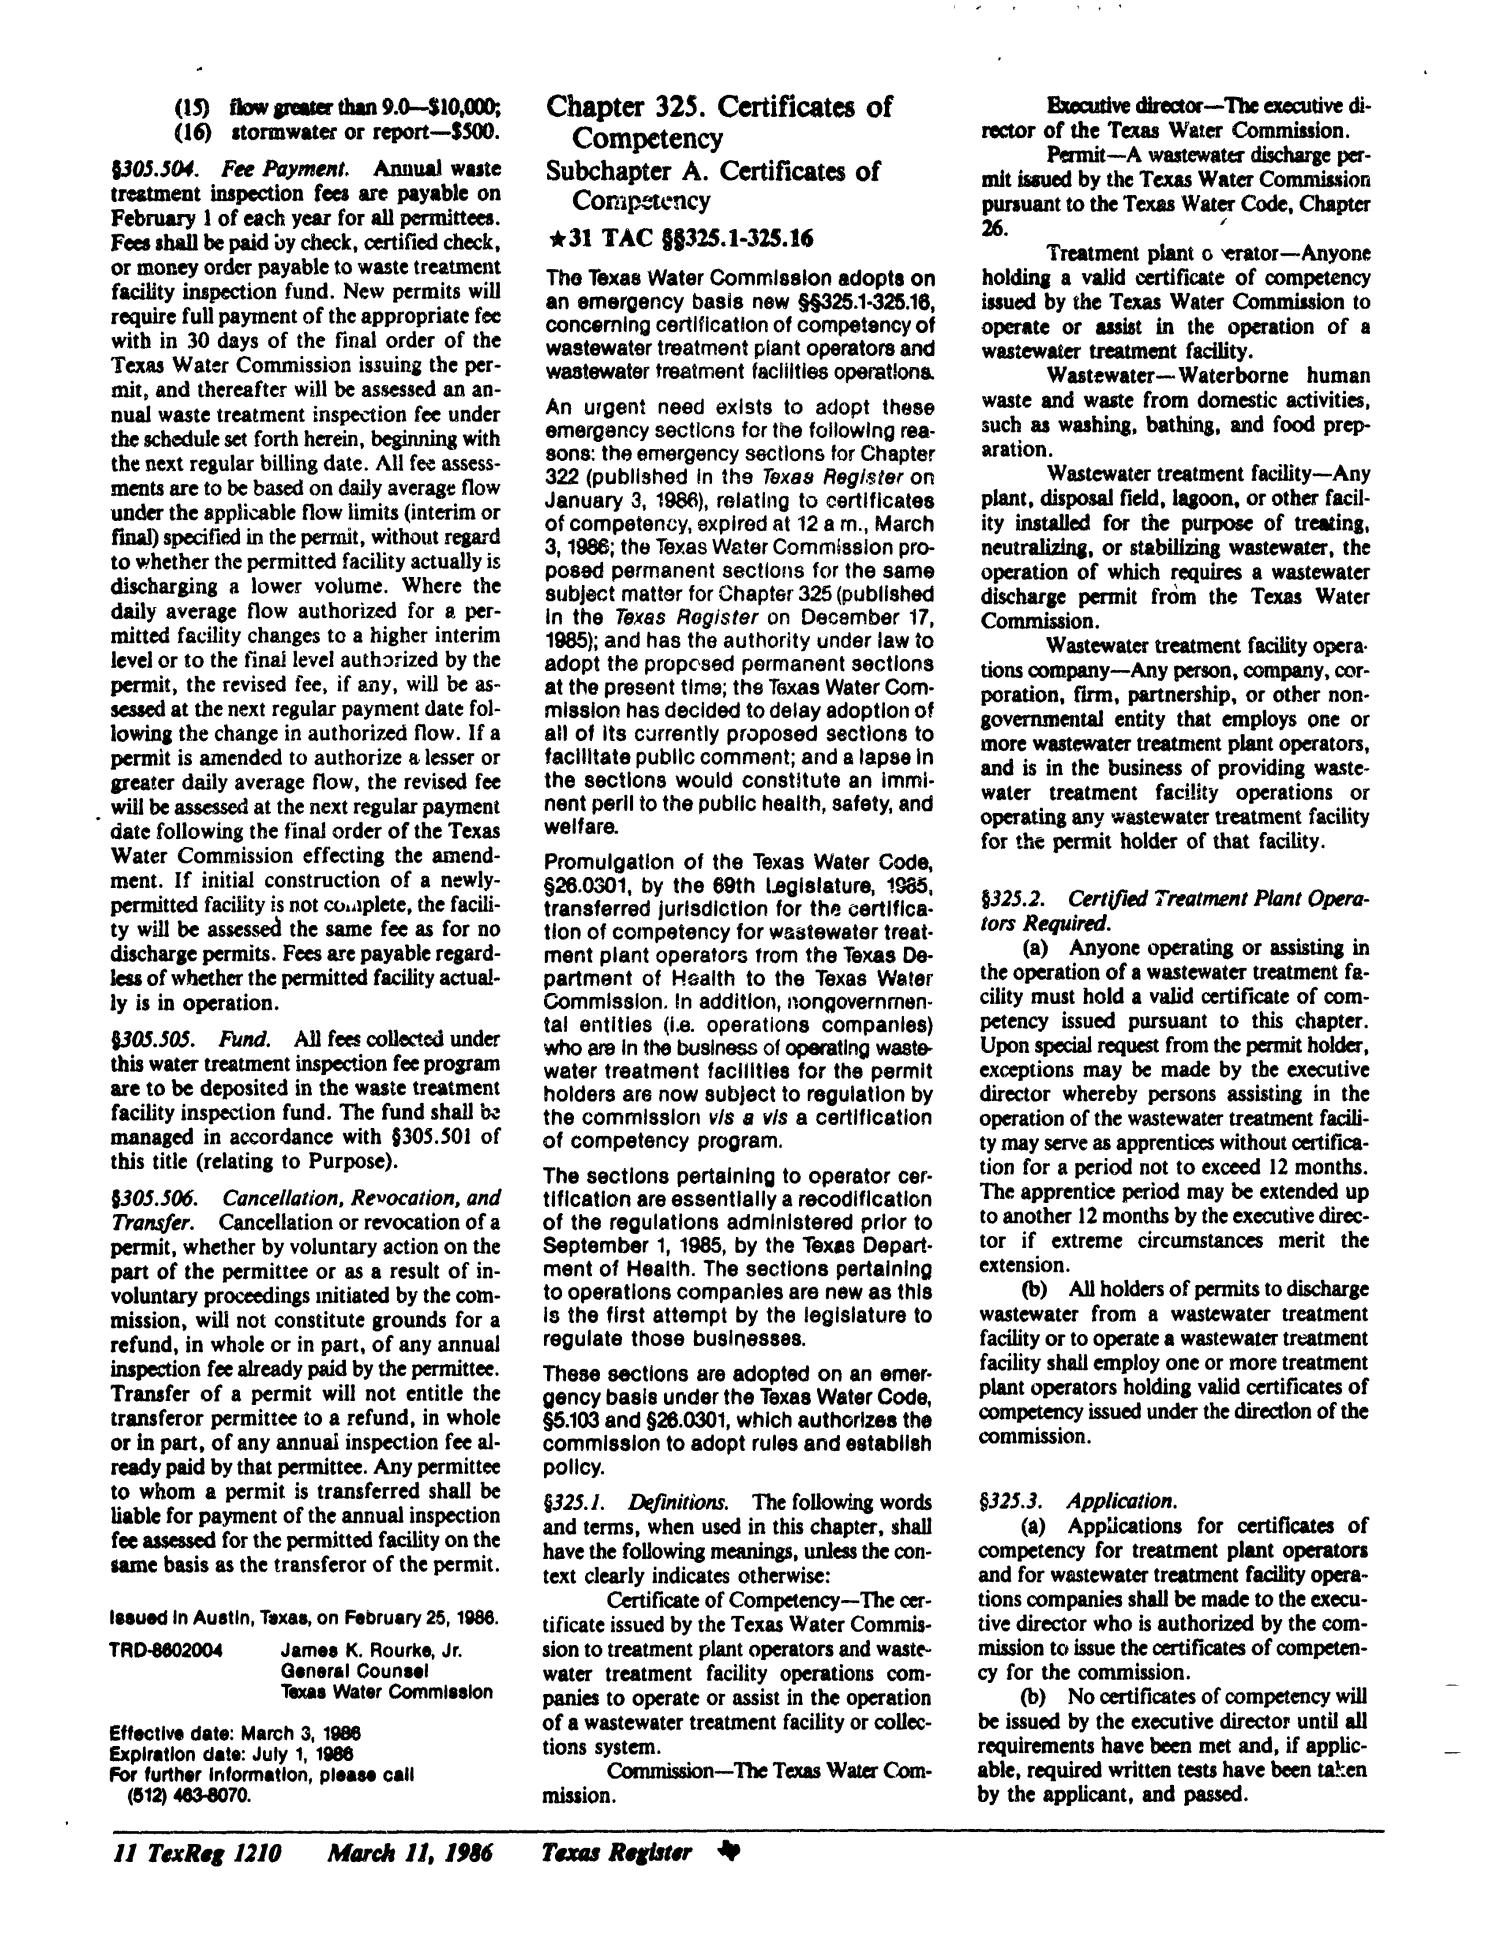 Texas Register, Volume 11, Number 19, Pages 1163-1244, March 11, 1986
                                                
                                                    1210
                                                